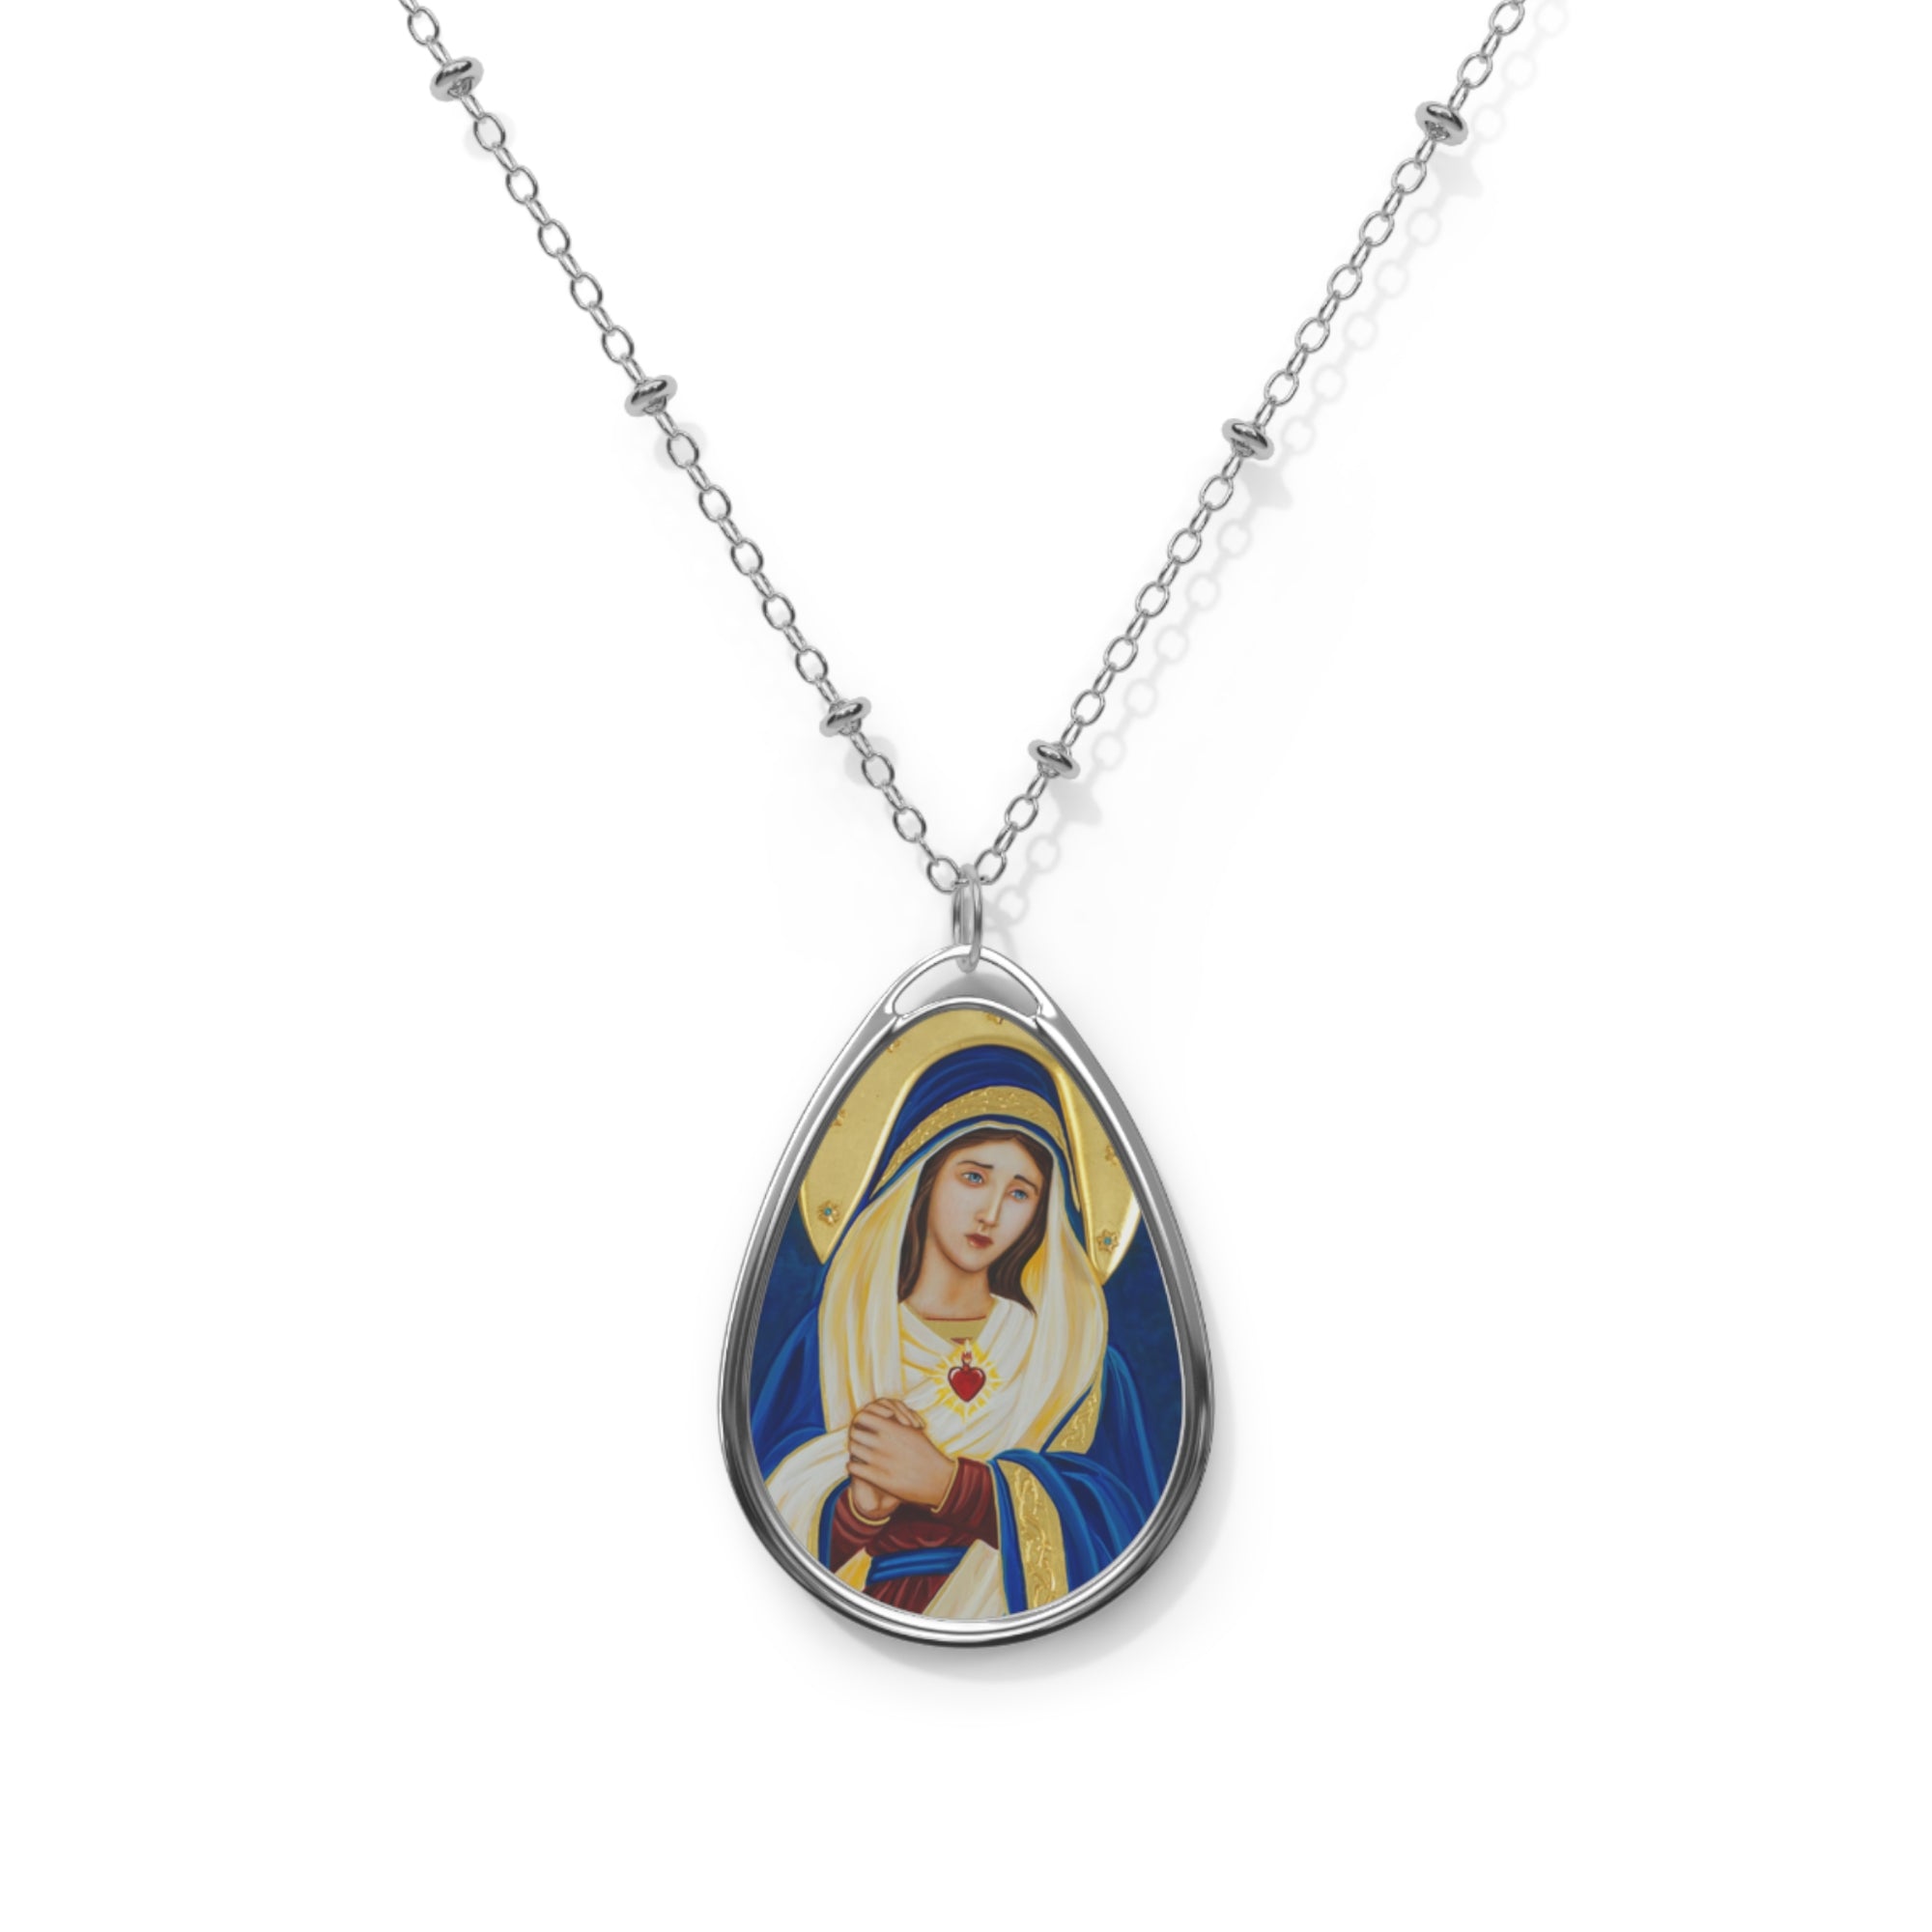 Our Lady of Sorrows Necklace